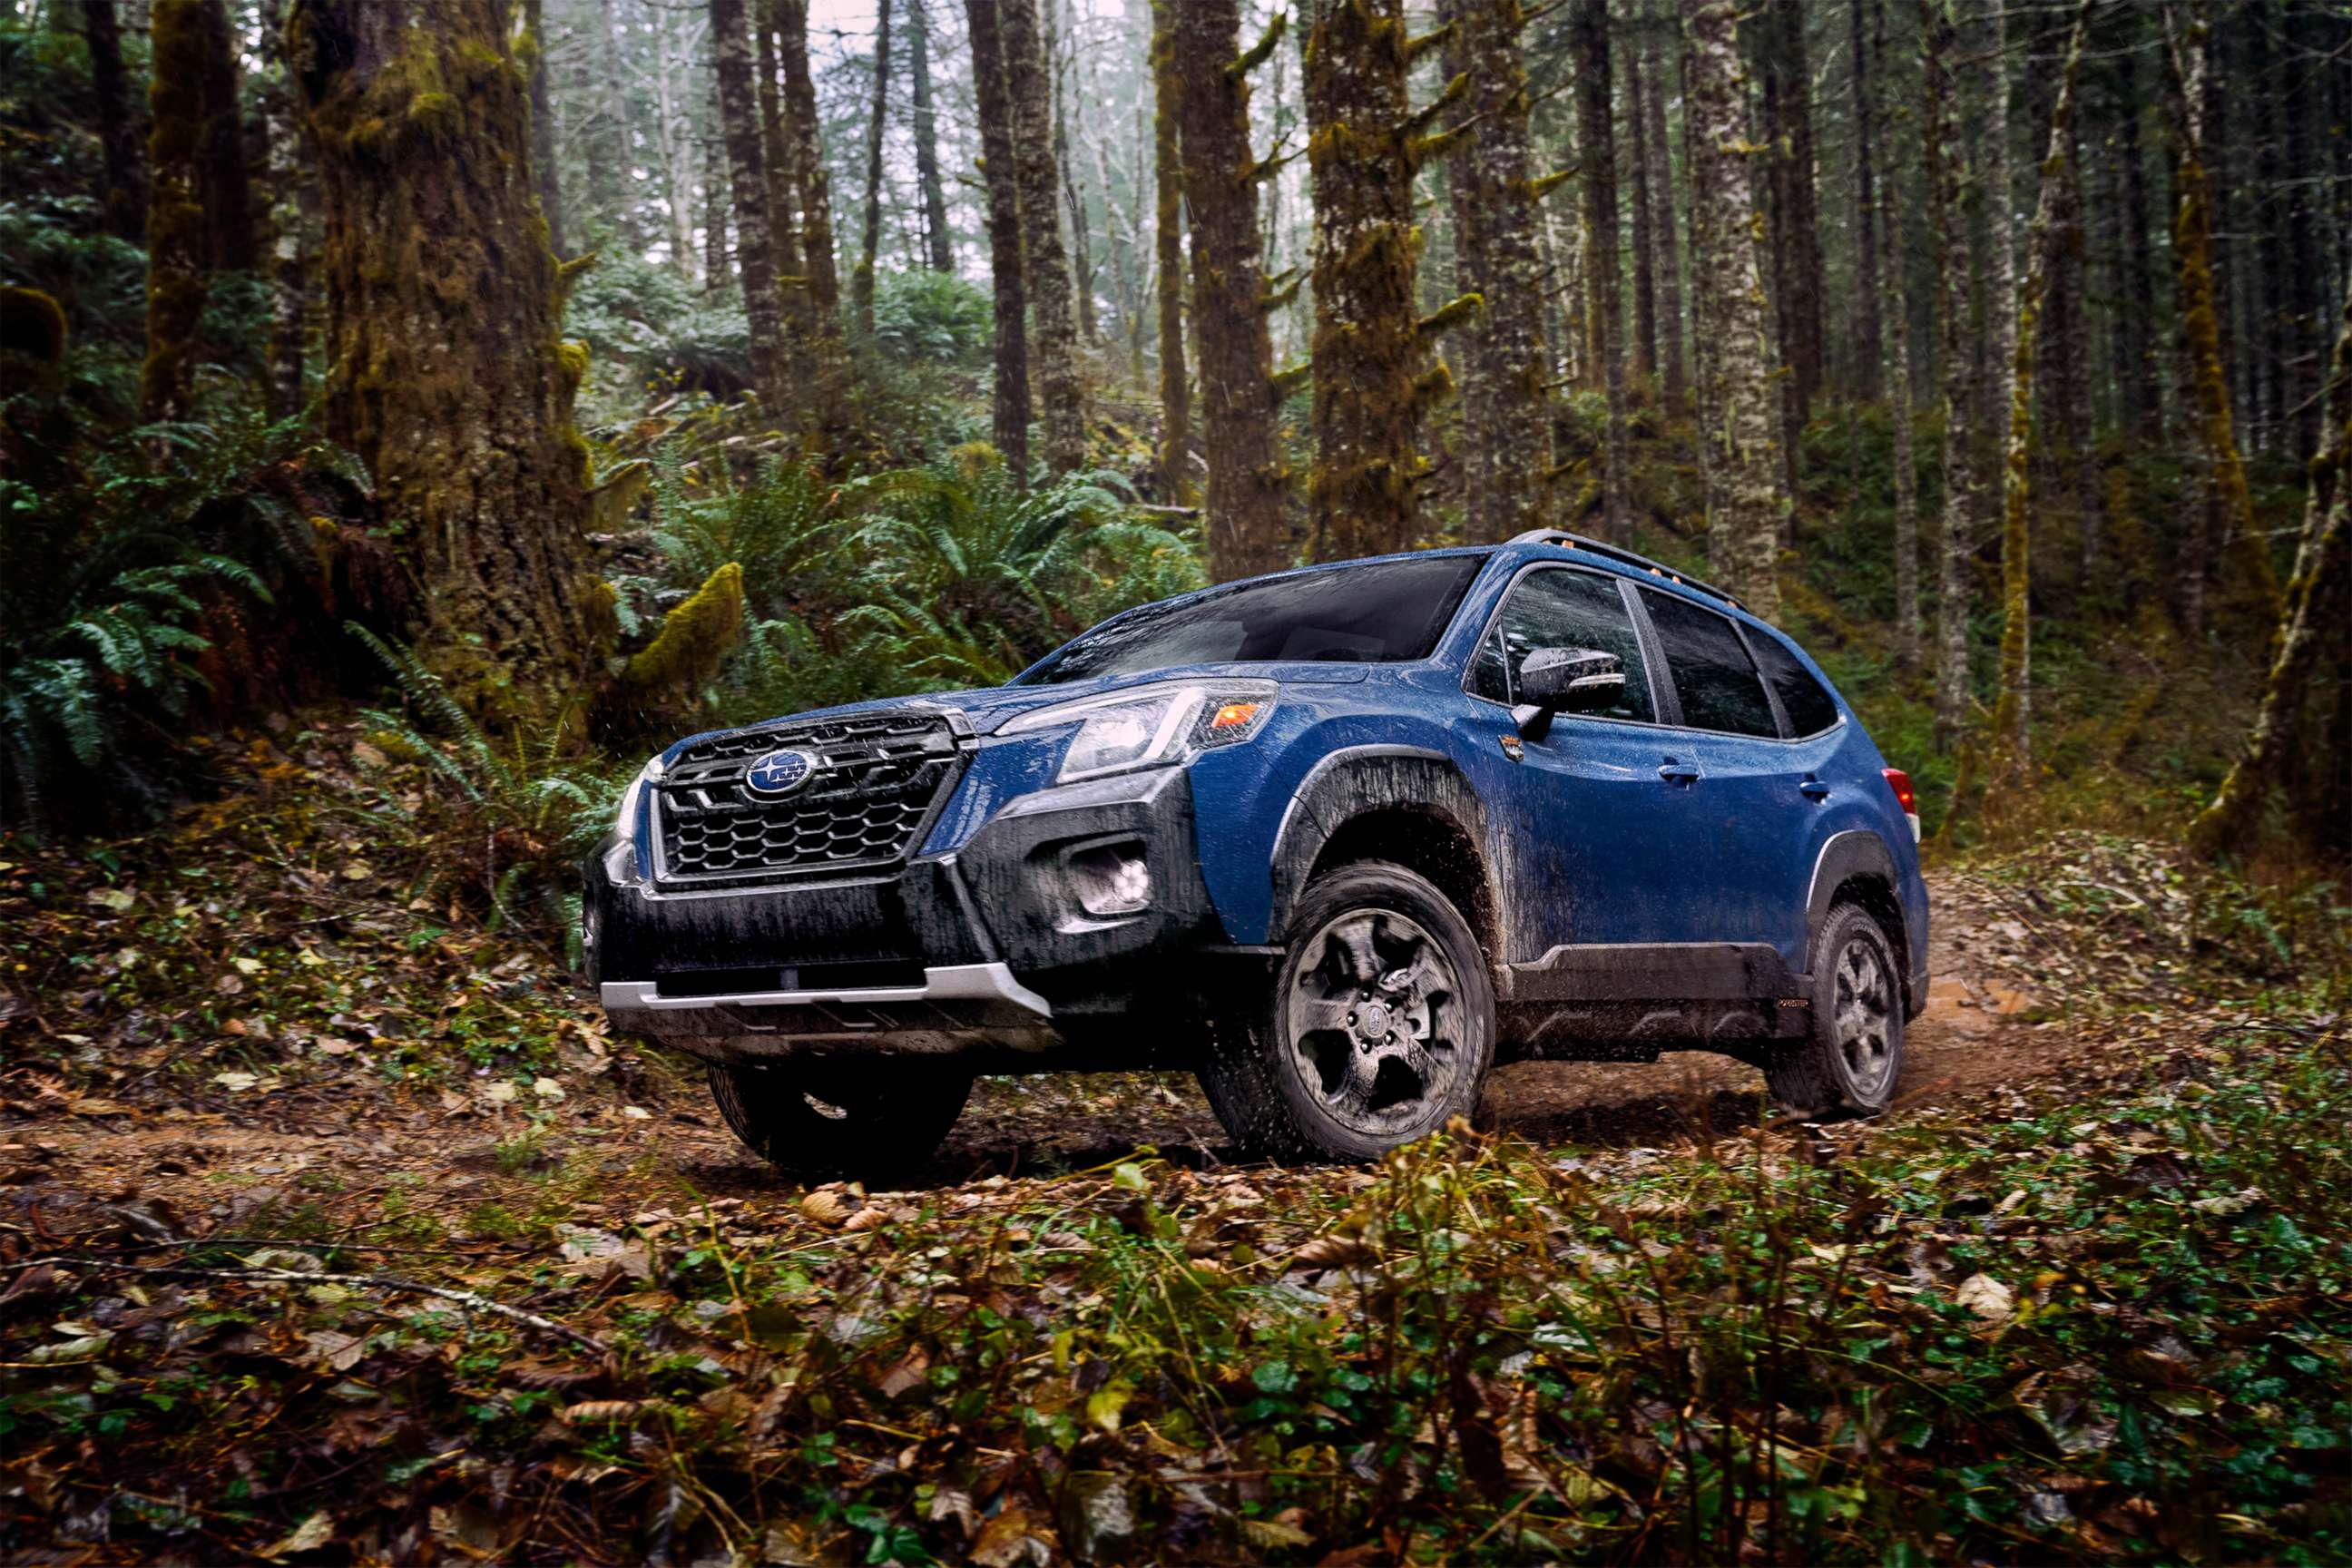 PHOTO: Subaru's best-selling models are the Forrester, pictured, and the Outback.